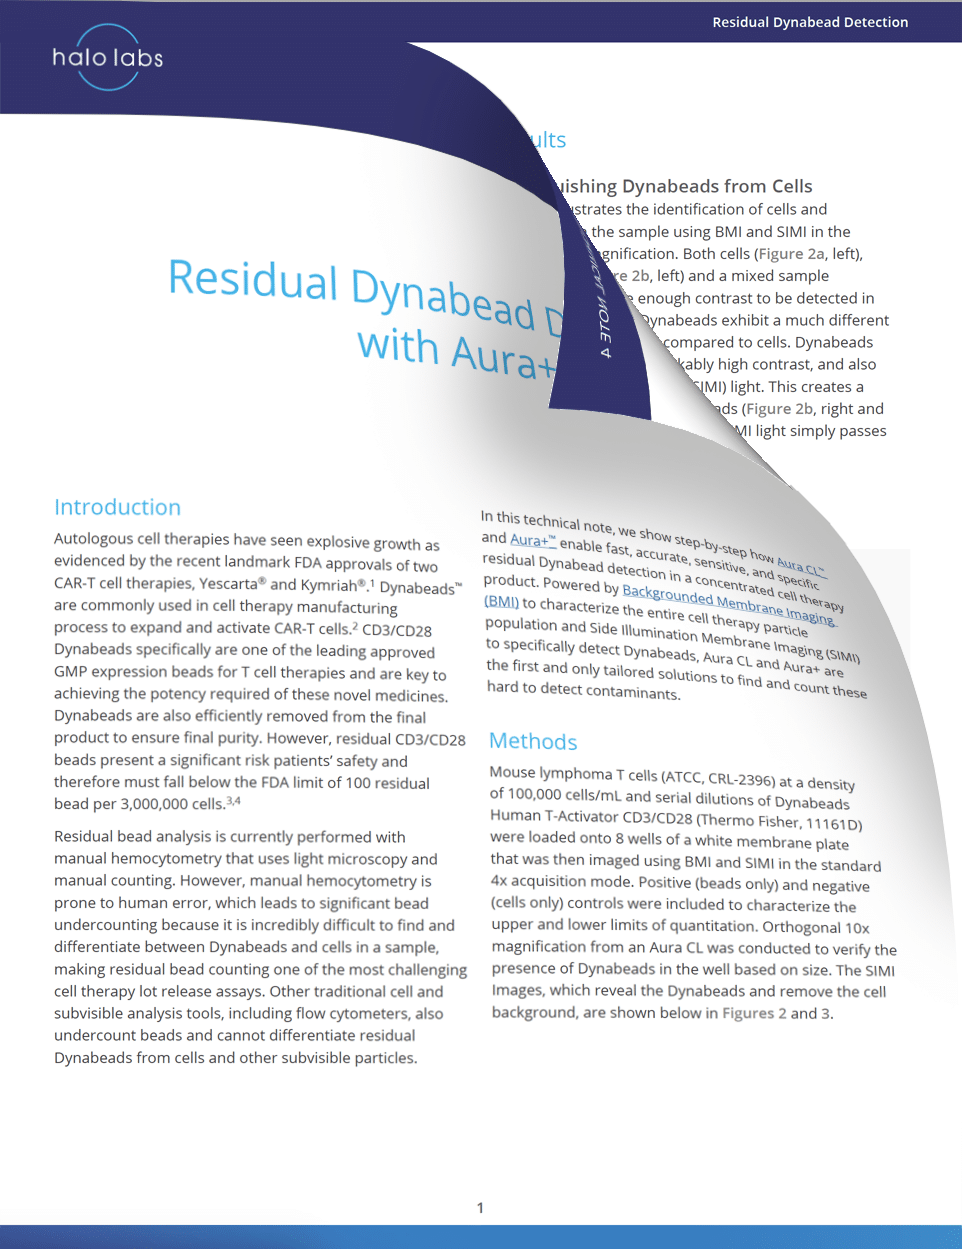 Tech Note 4: Residual Dynabead Detection with Aura